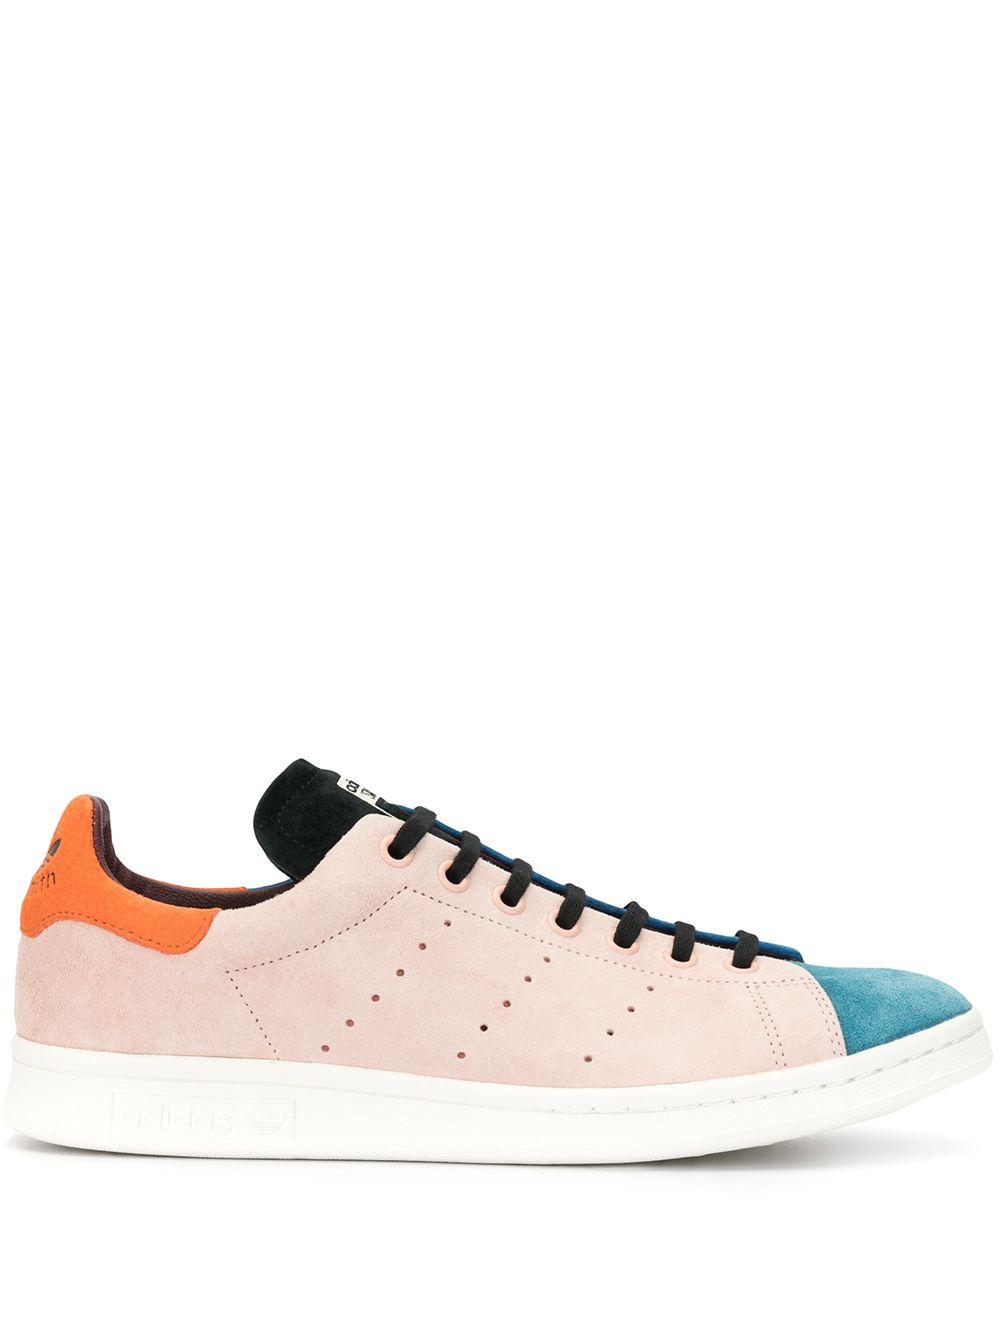 adidas Suede Stan Smith Sneakers in Blue for Men - Save 30% - Lyst